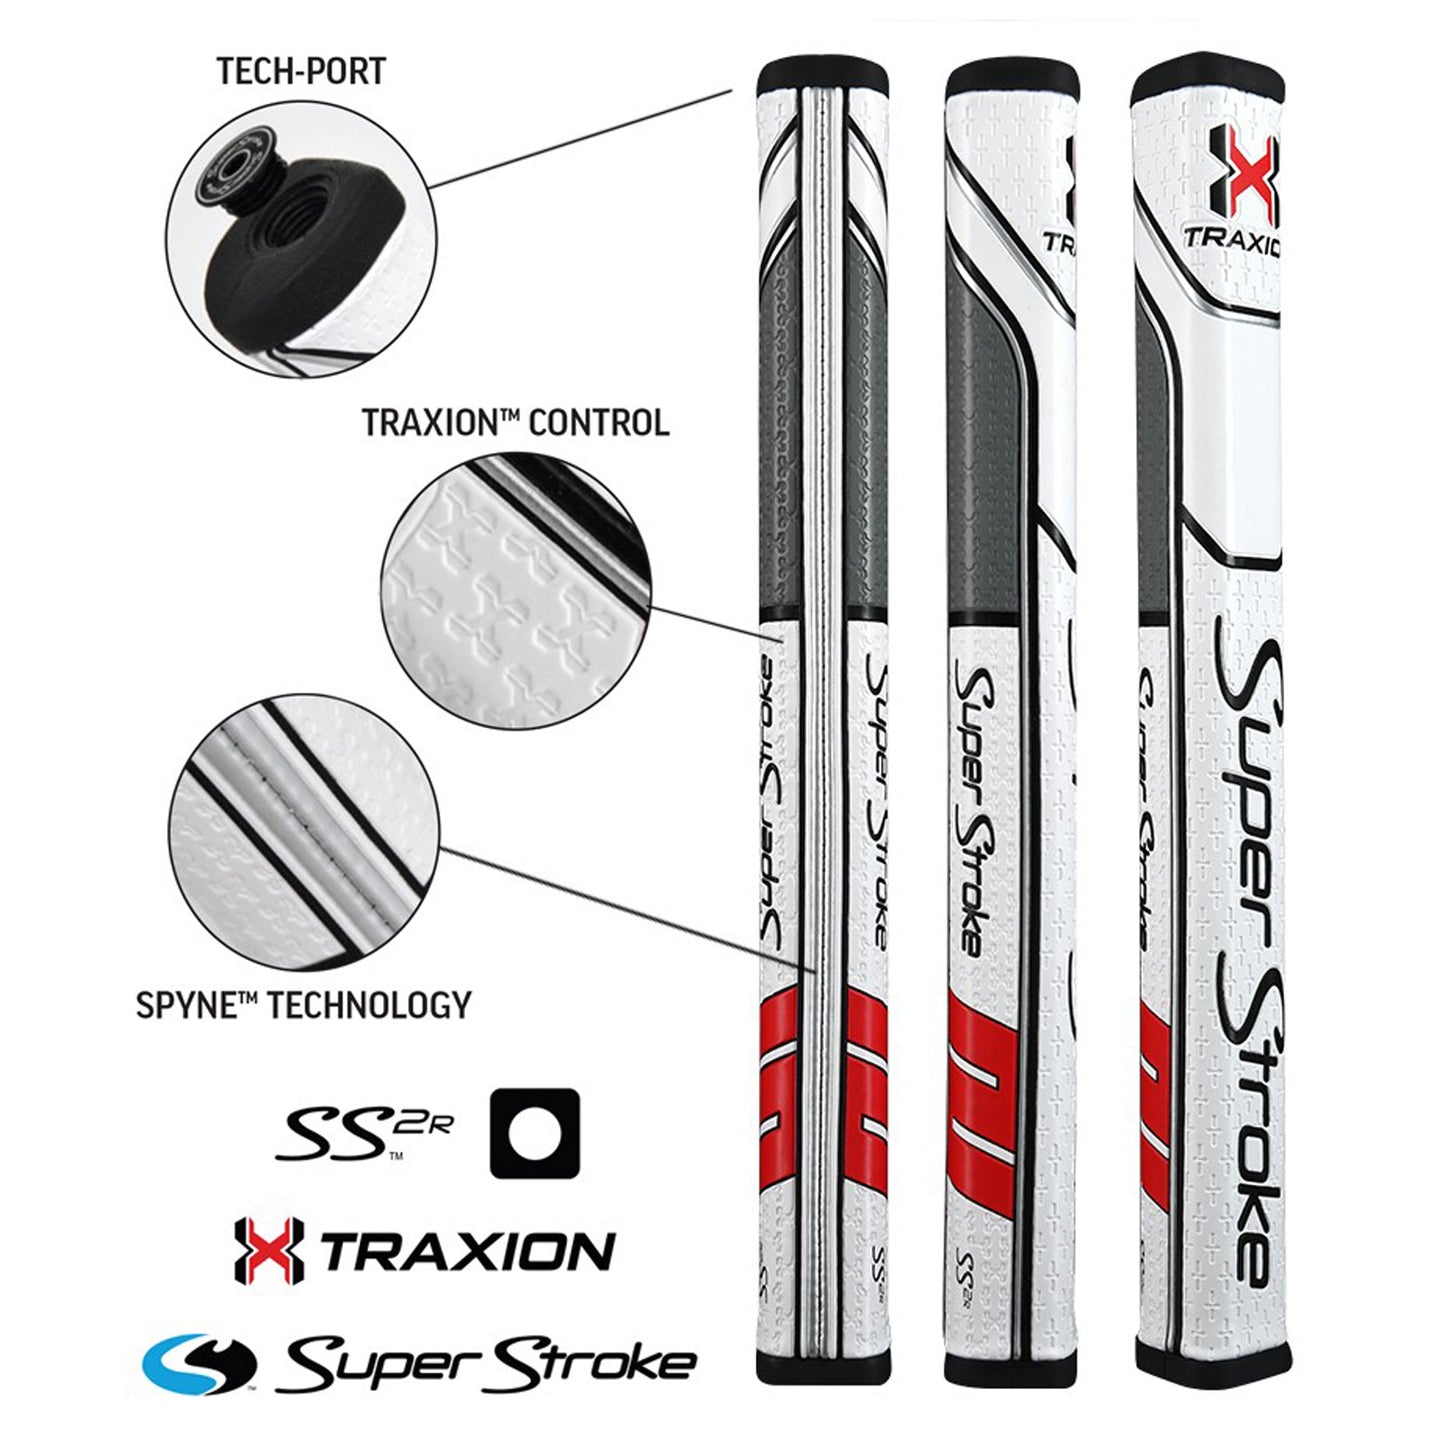 SuperStroke Traxion SS2R Squared Putter Grips